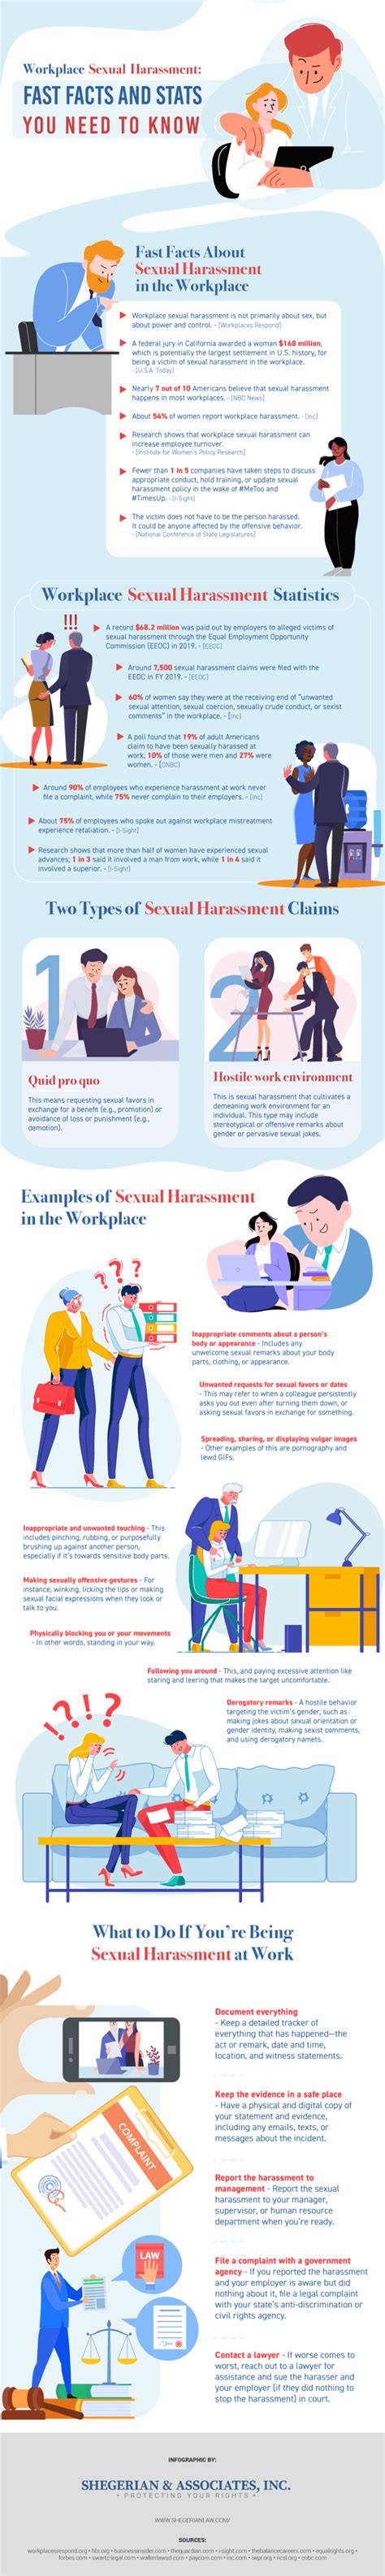 Workplace Sexual Harassment Fast Facts And Stats You Need To Know